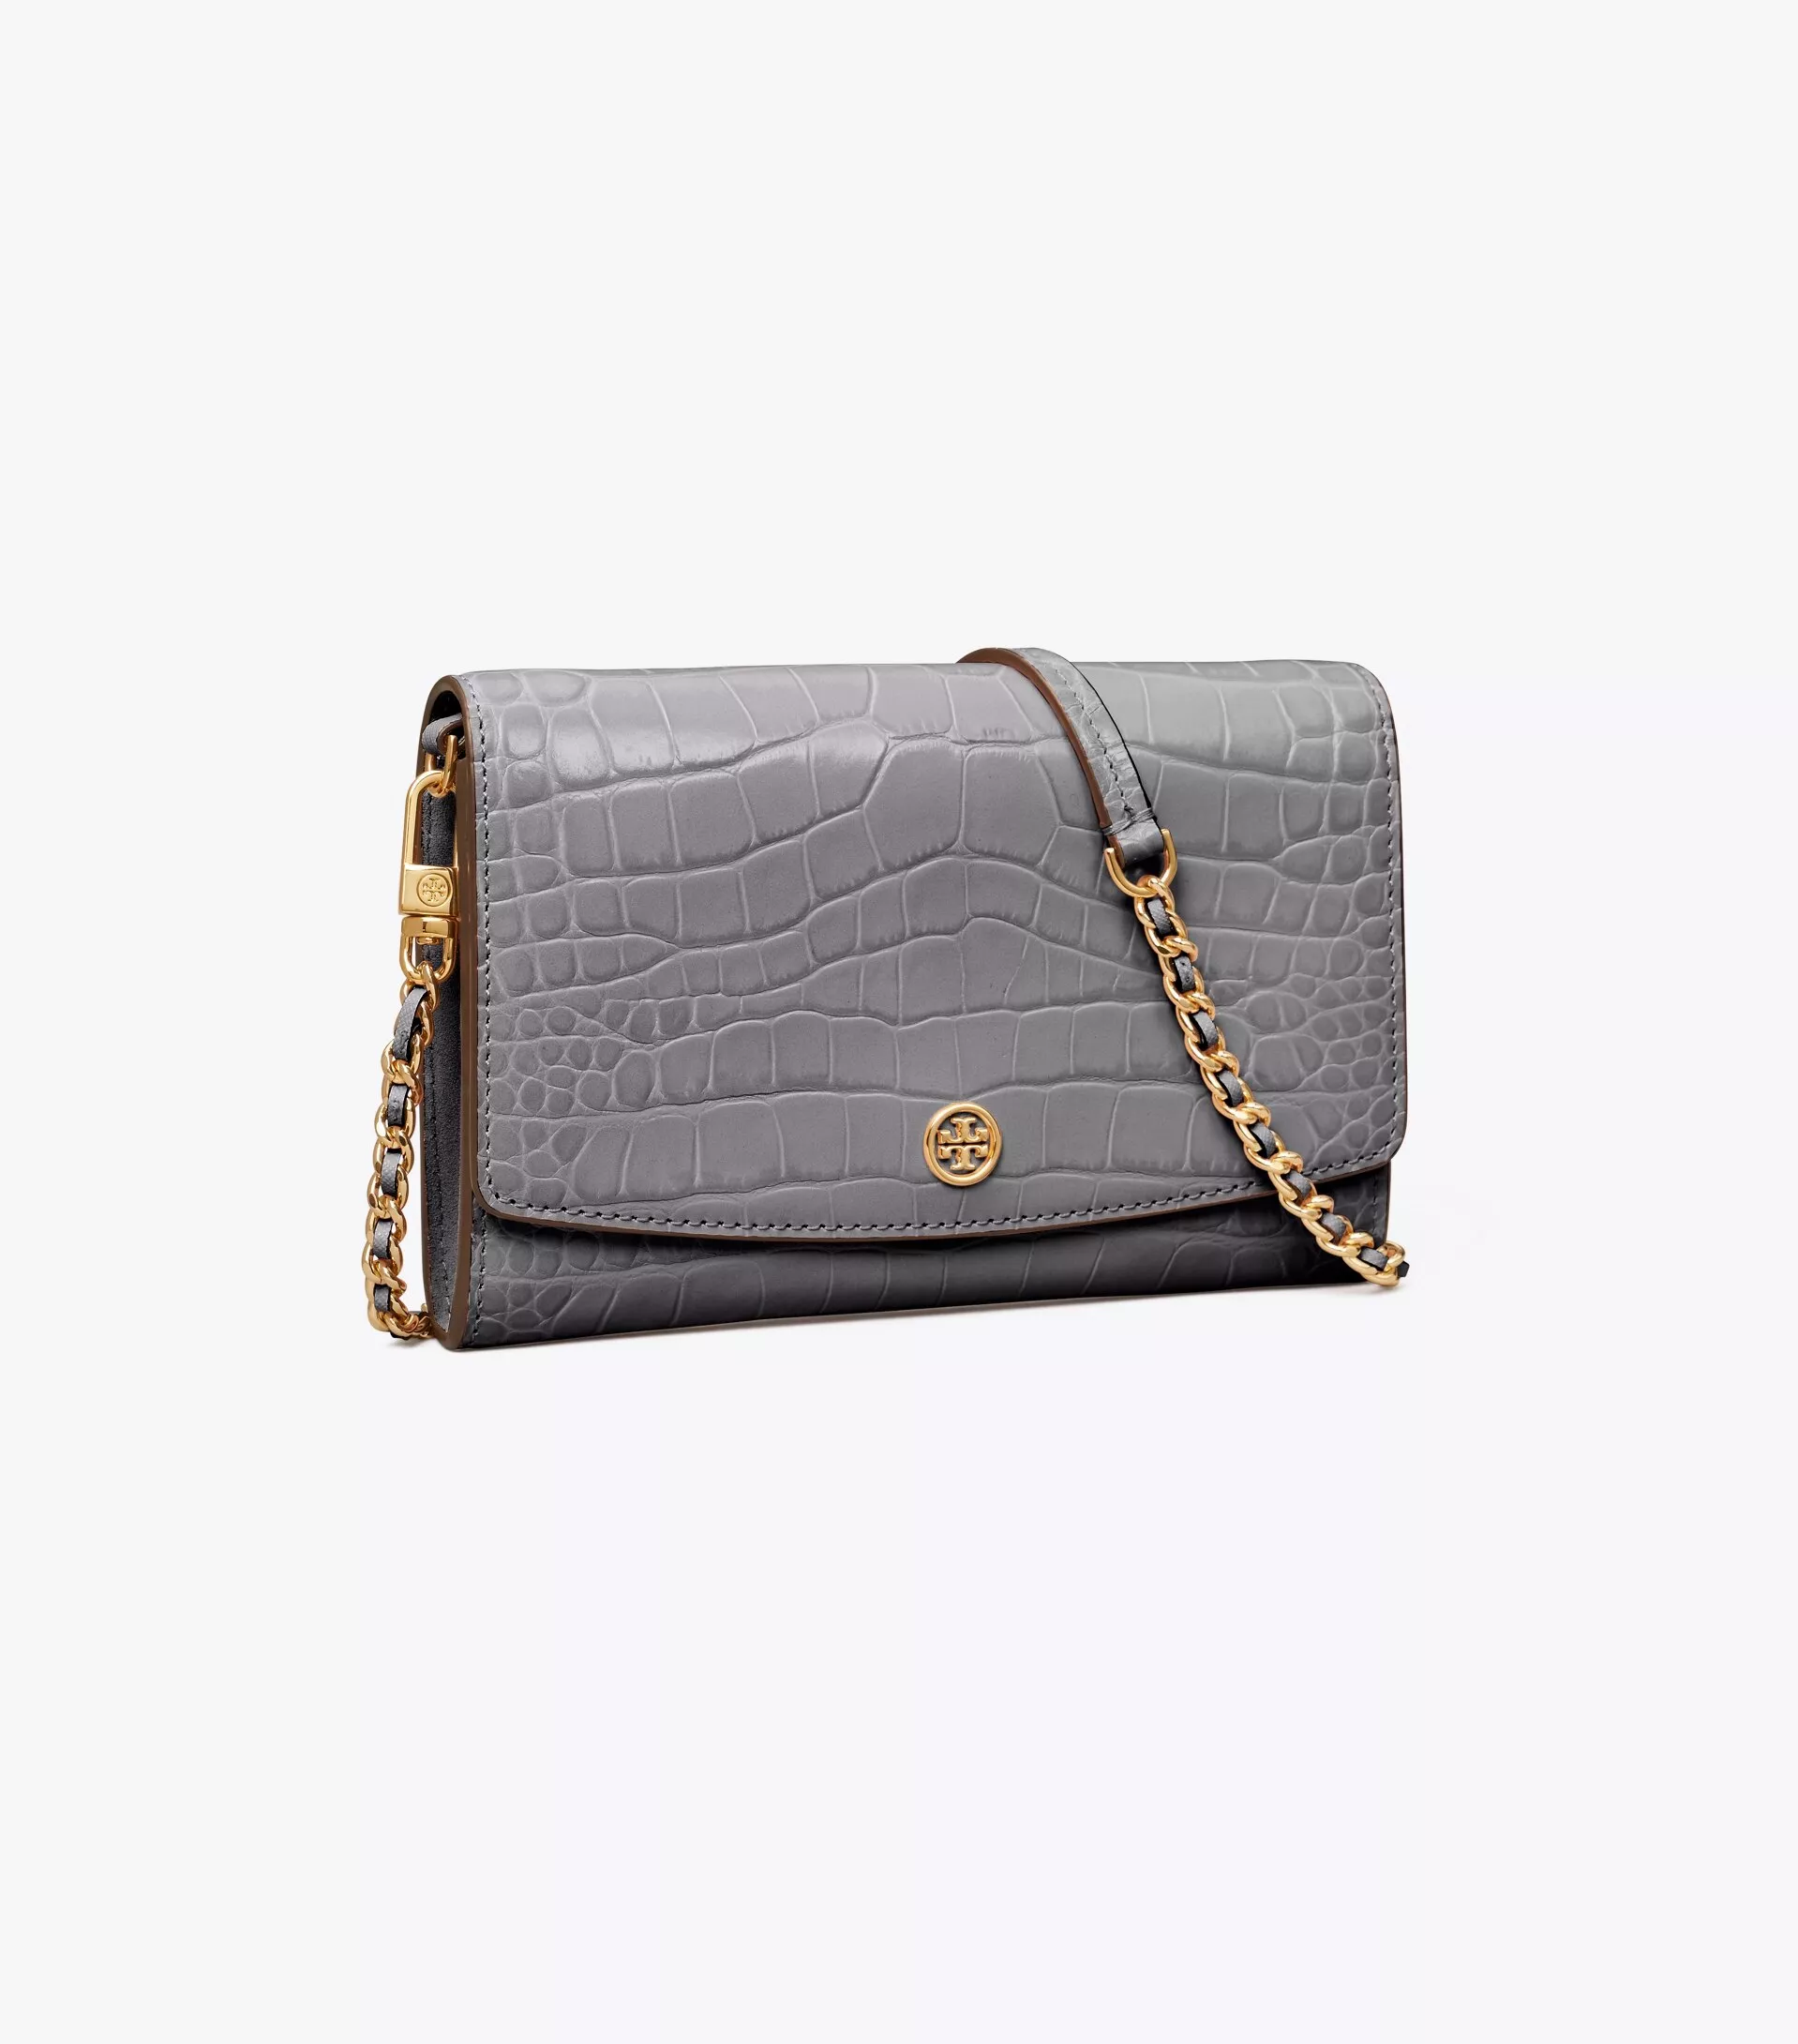  Tory Burch Women's Robinson Embossed Chain Wallet